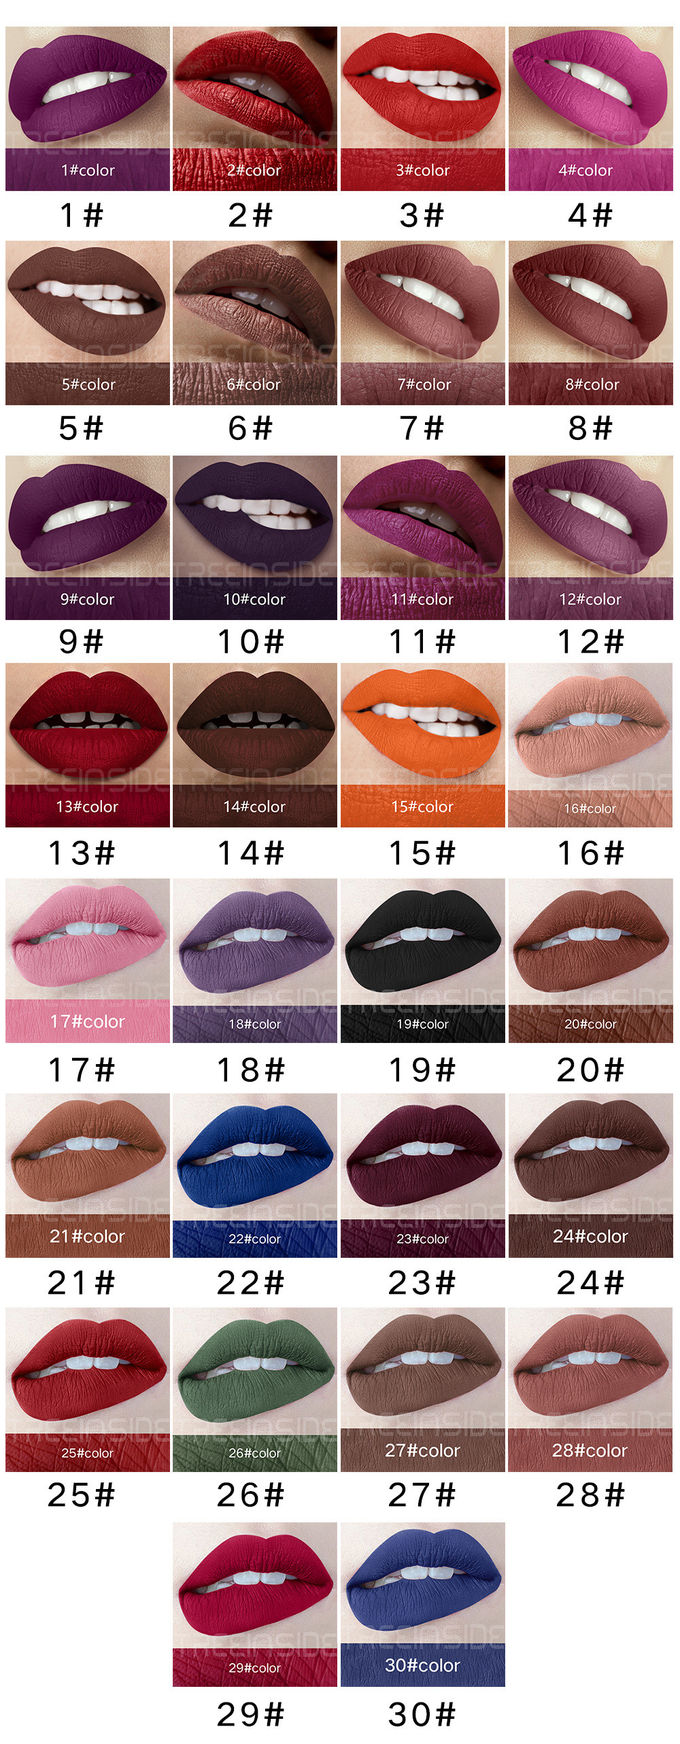 Cosmetics Natural Makeup Lipsticks Matte With Different Colors Sunscreen